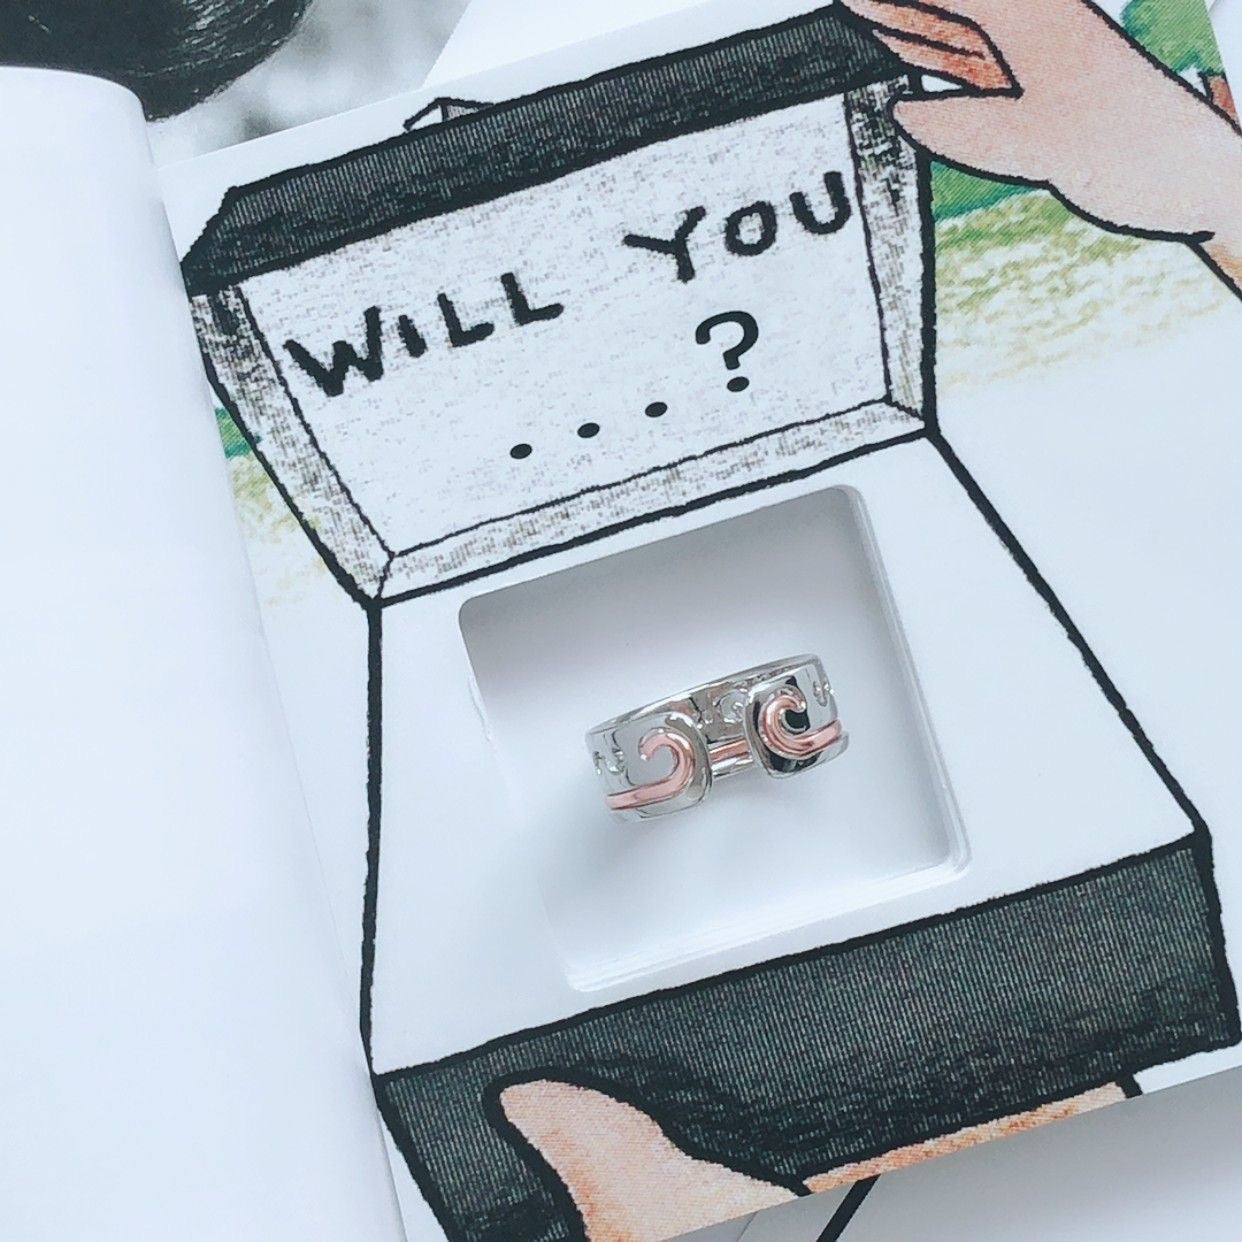 【Ahhkawaii】Hand-Flipped Book: Romantic Surprise Proposal, Couple's Artistic Confession, Comic Book of Love